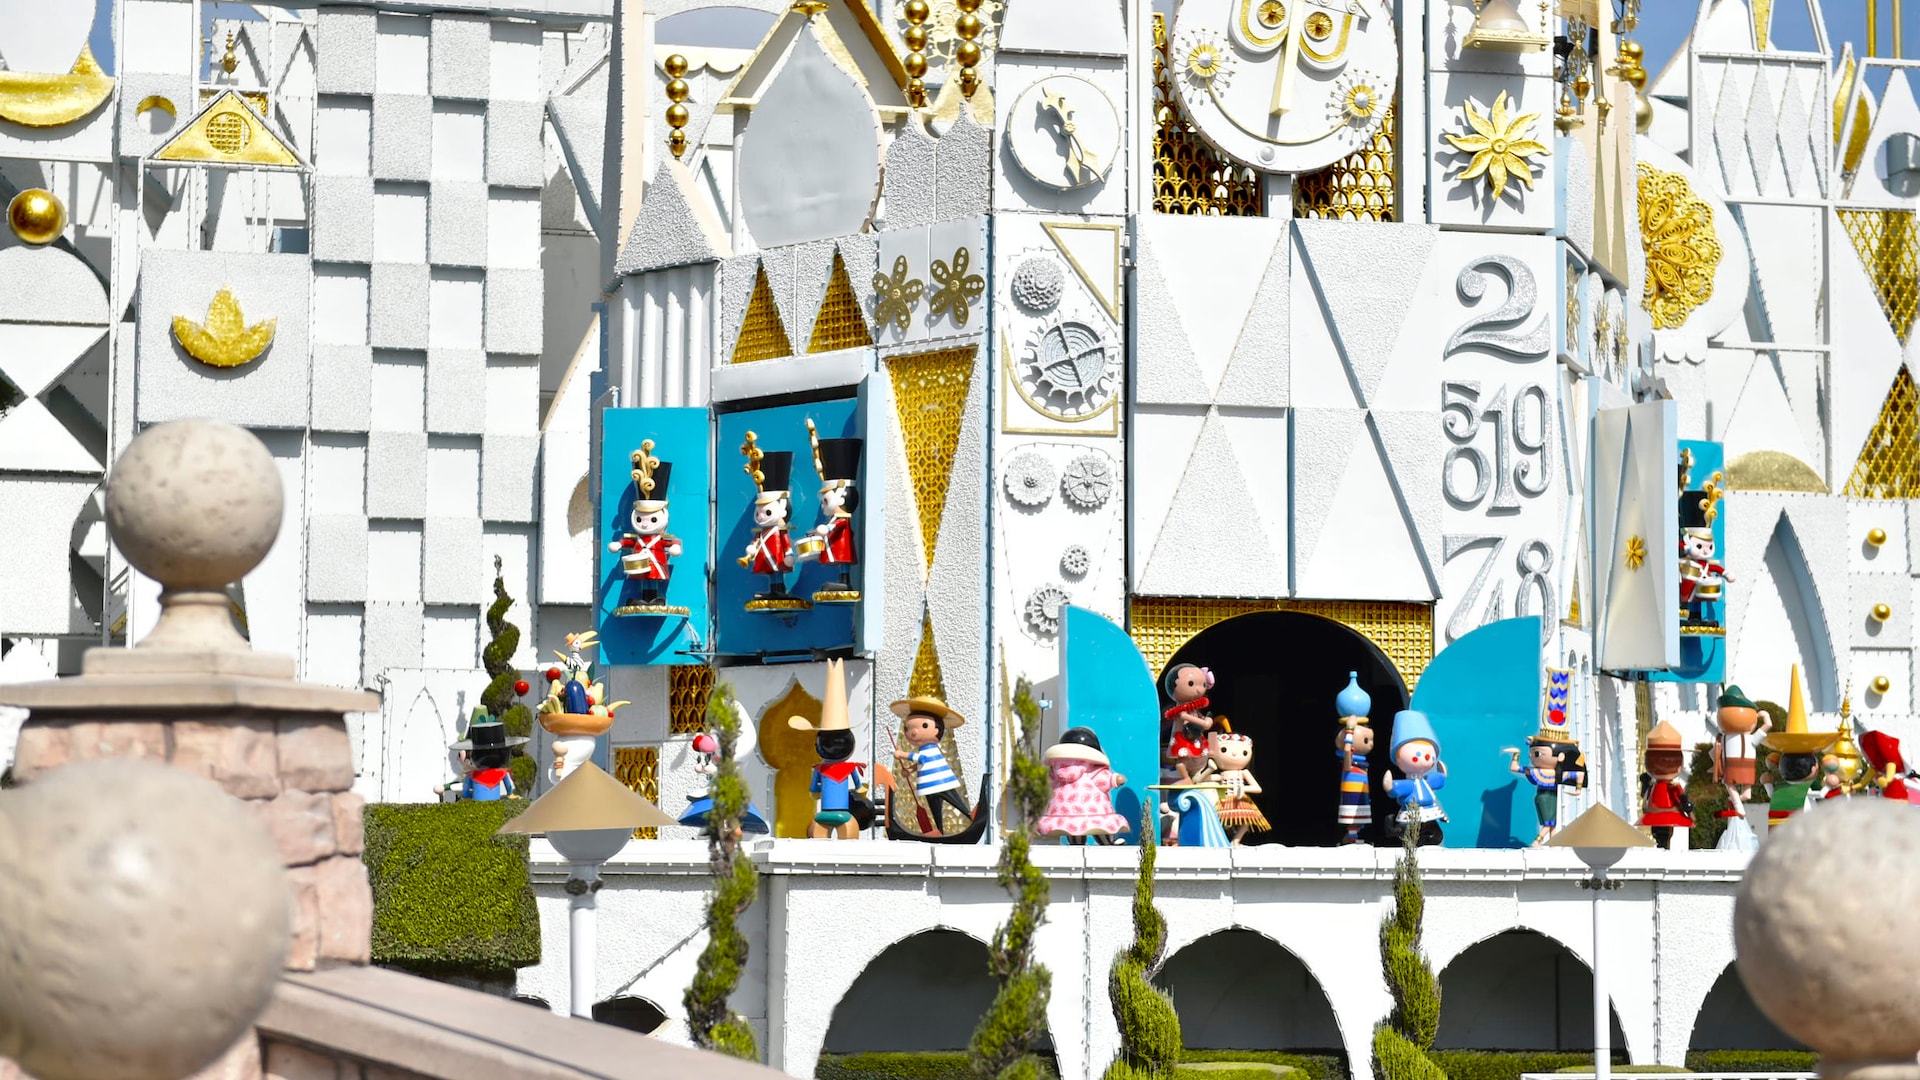 "it’s a small world"